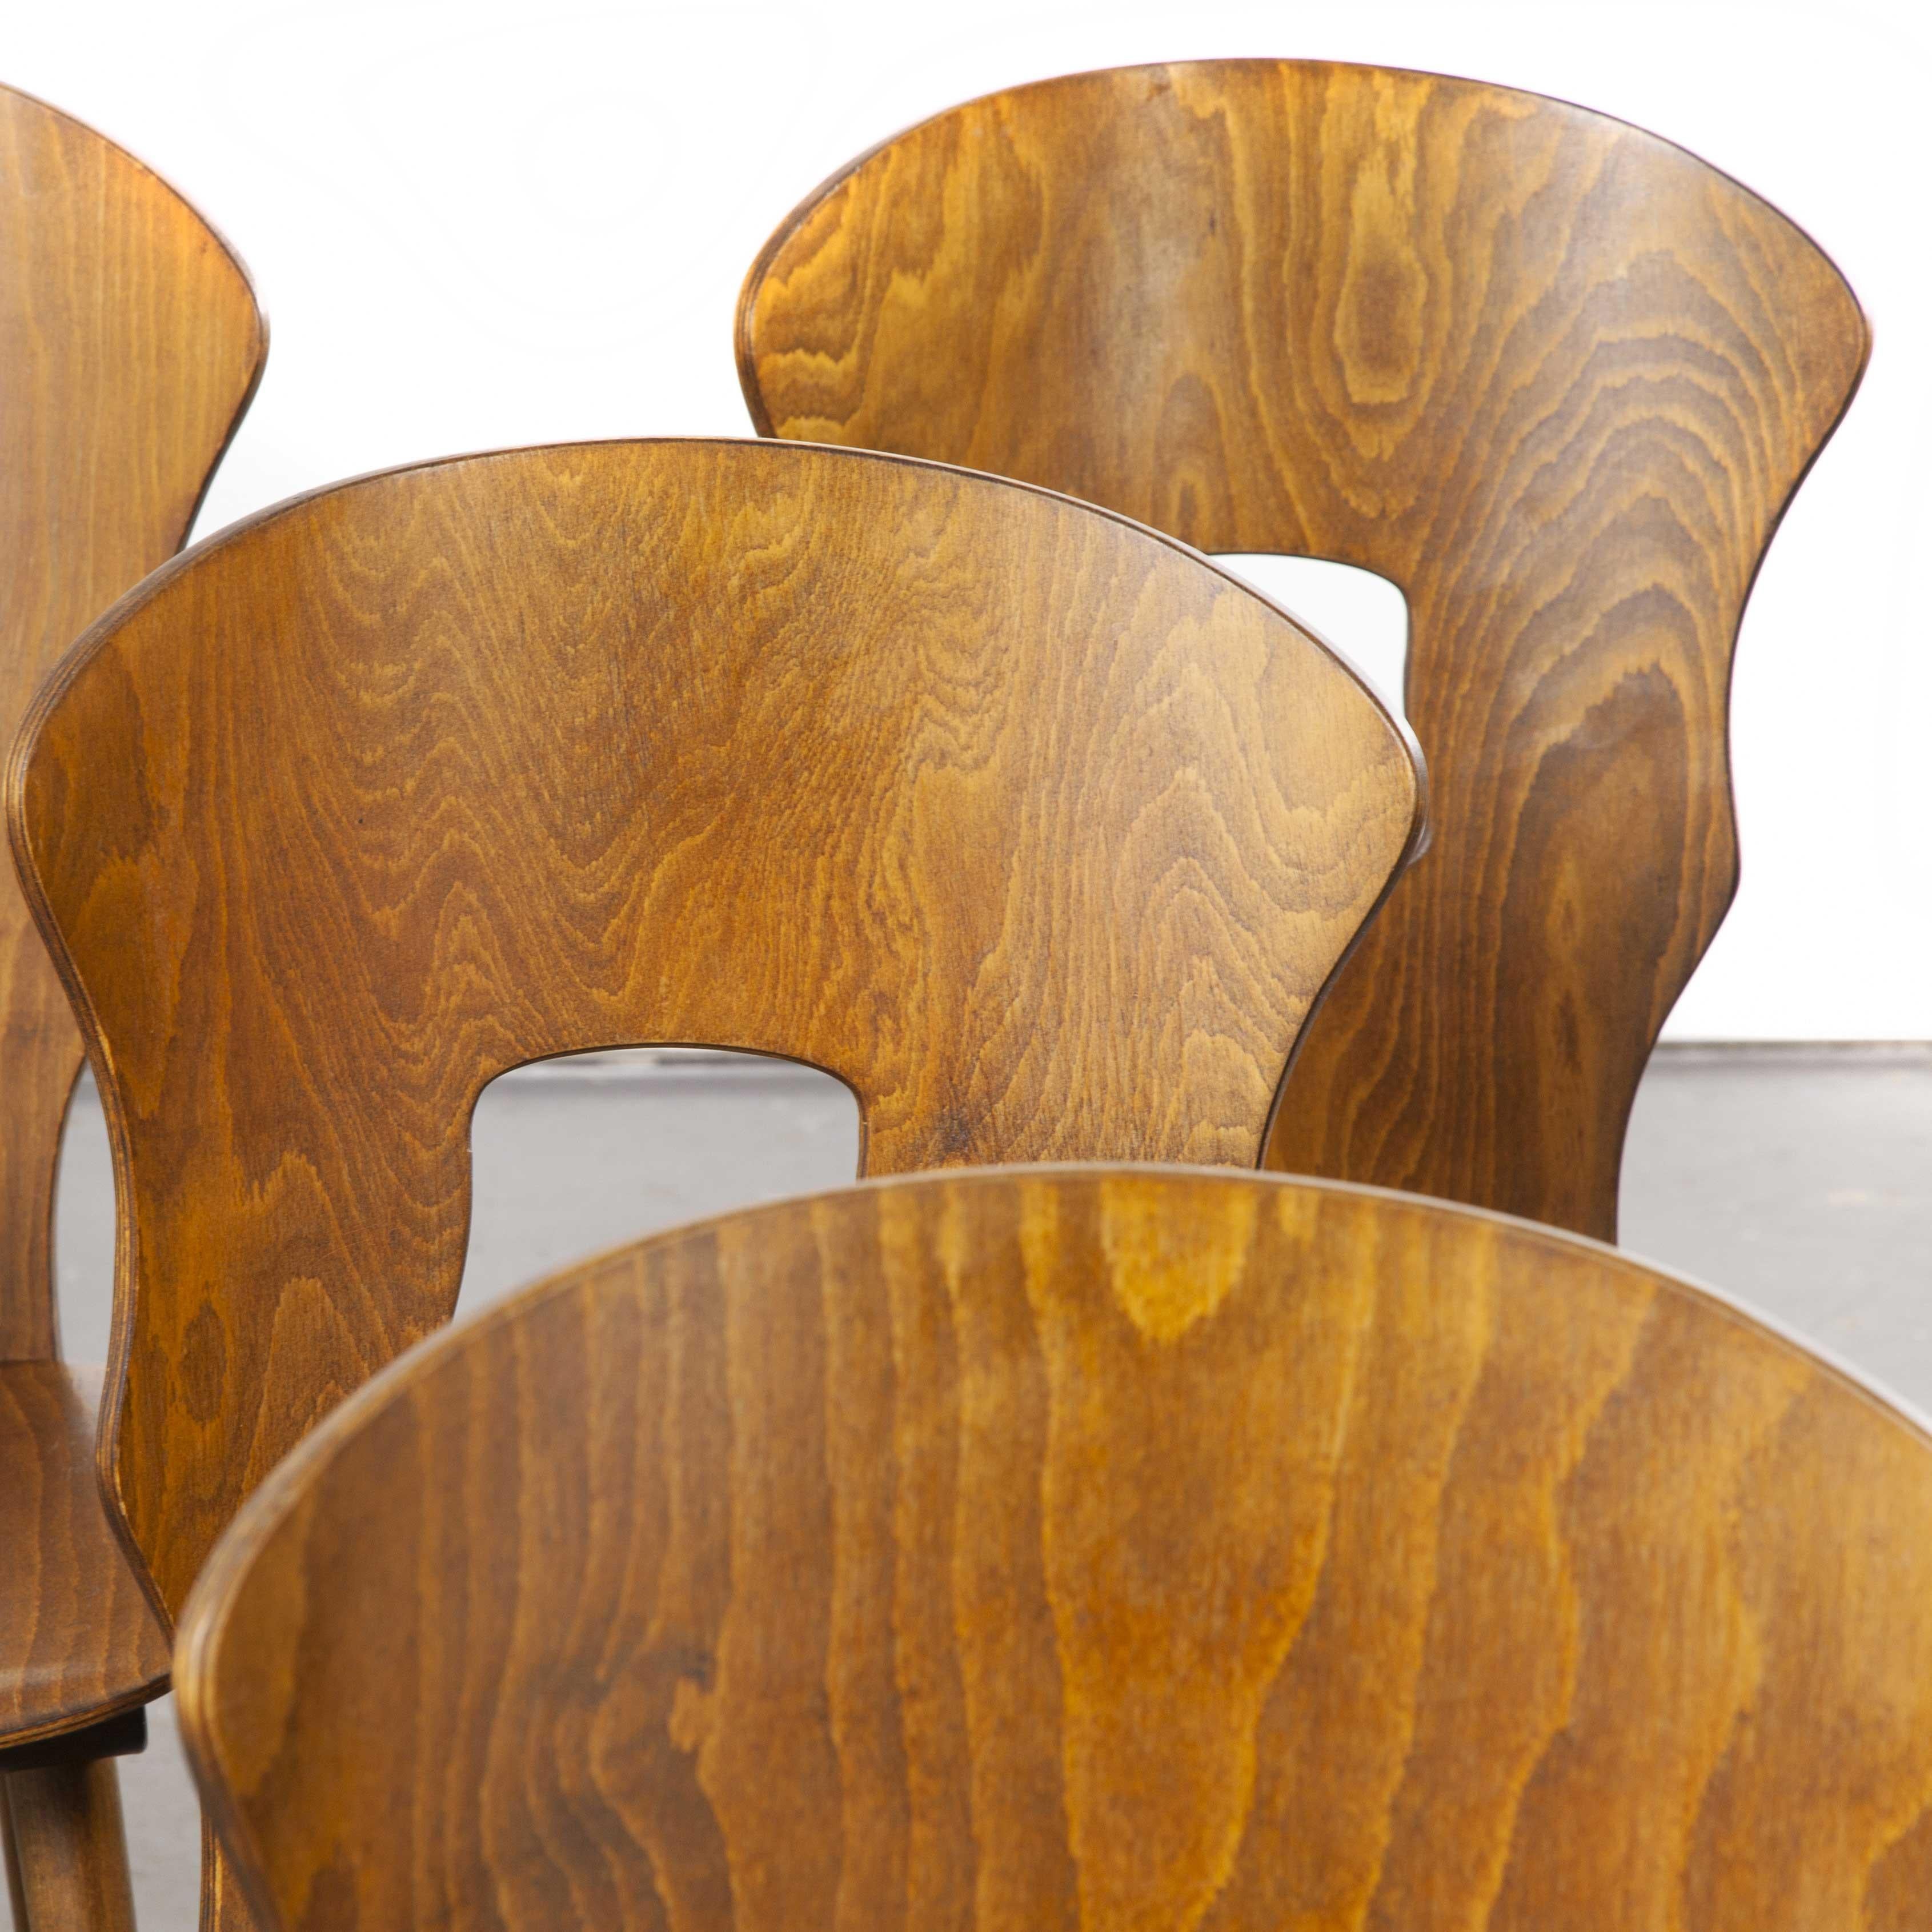 1950s French Baumann bentwood Gentiane dining chair - set of eight. Classic beech bistro chair made in France by the maker Joamin Baumann. Baumann is a slightly off the radar French producer just starting to gain traction in the market. Baumann was